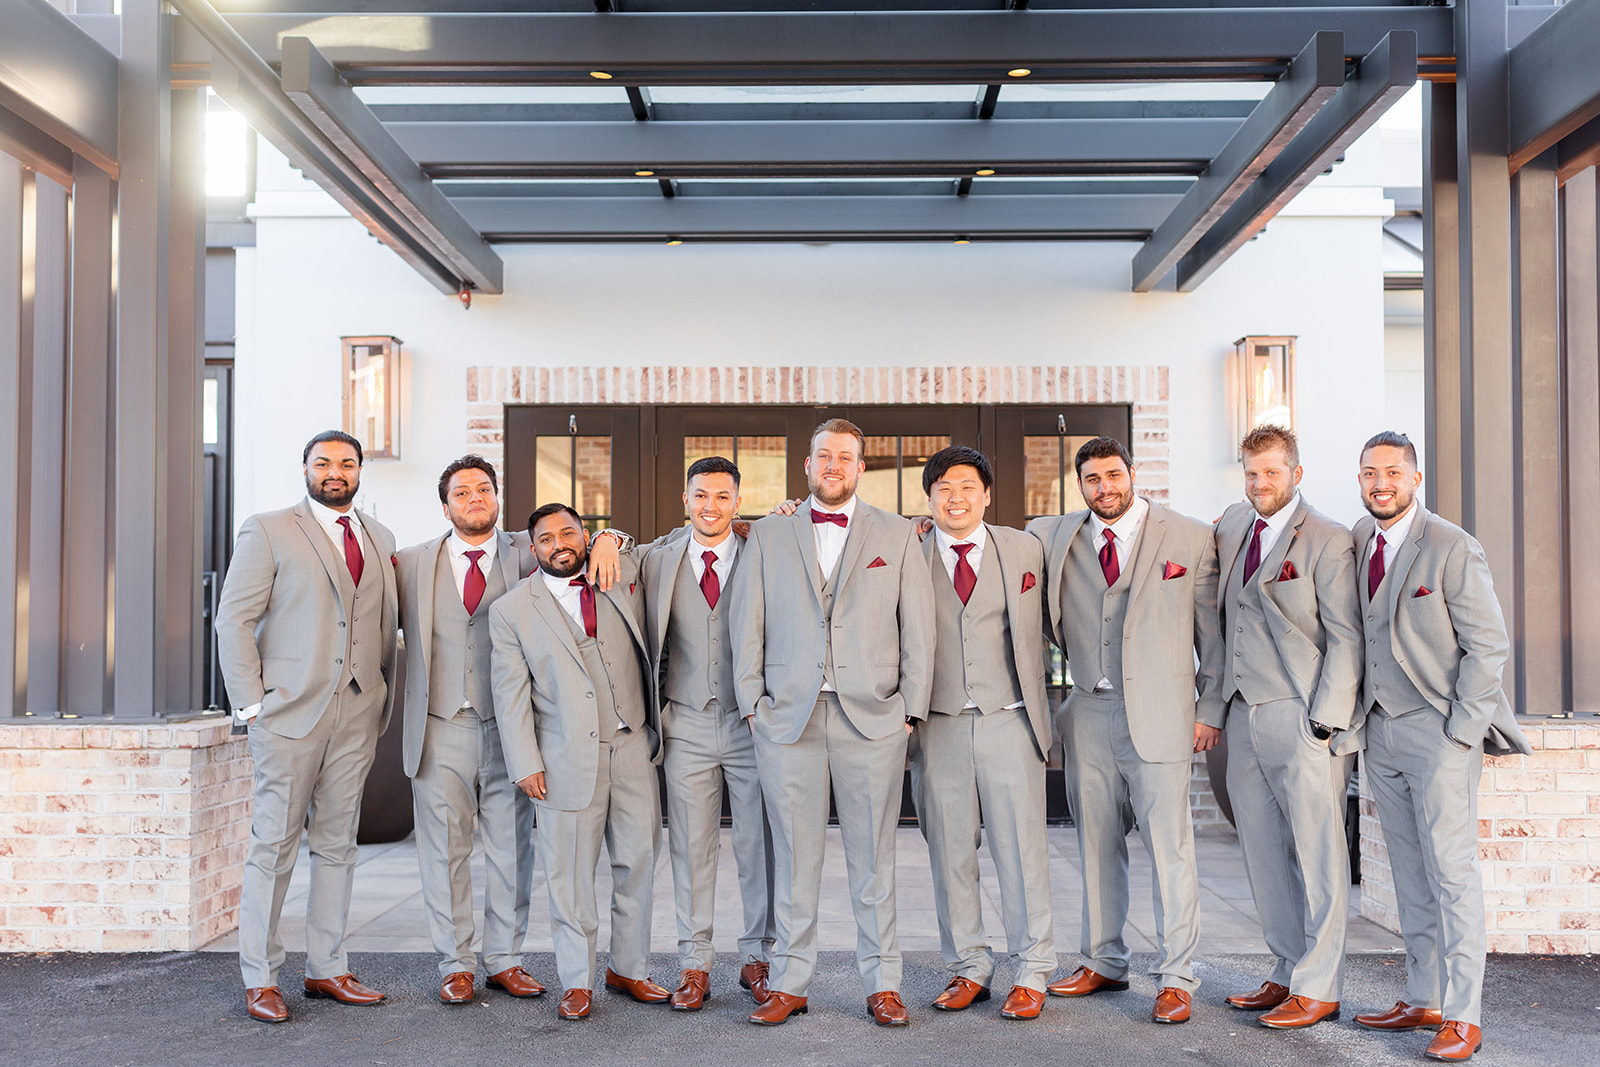 A groom stands with his many groomsmen in grey suits and red ties at the entrance to the wedding venue